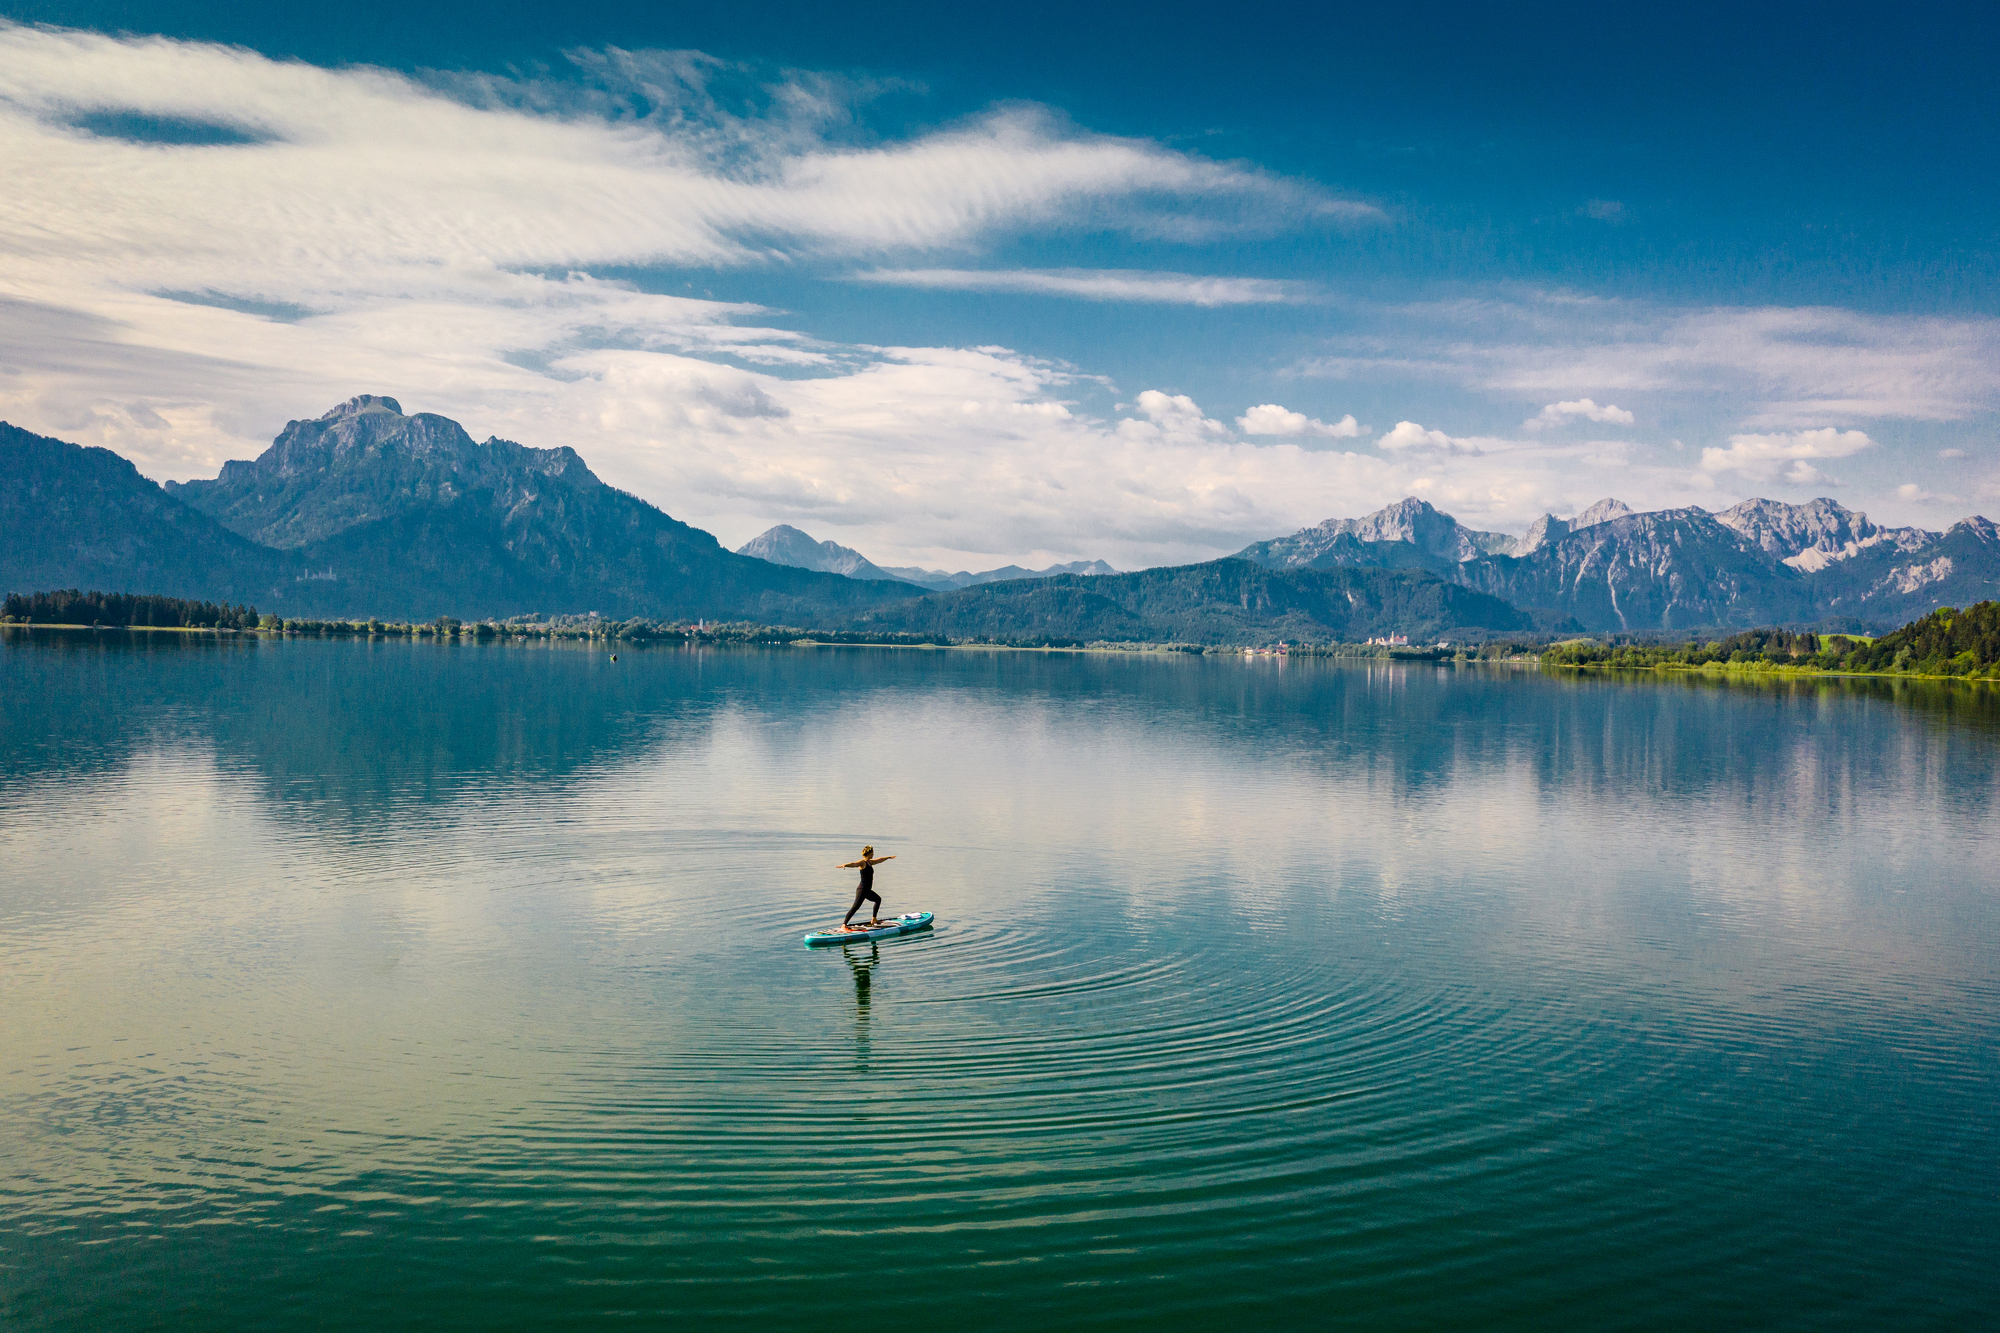 Yoga on the Forggensee with picturesque mountain scenery in the background © Allgäu GmbH, Erika Dürr